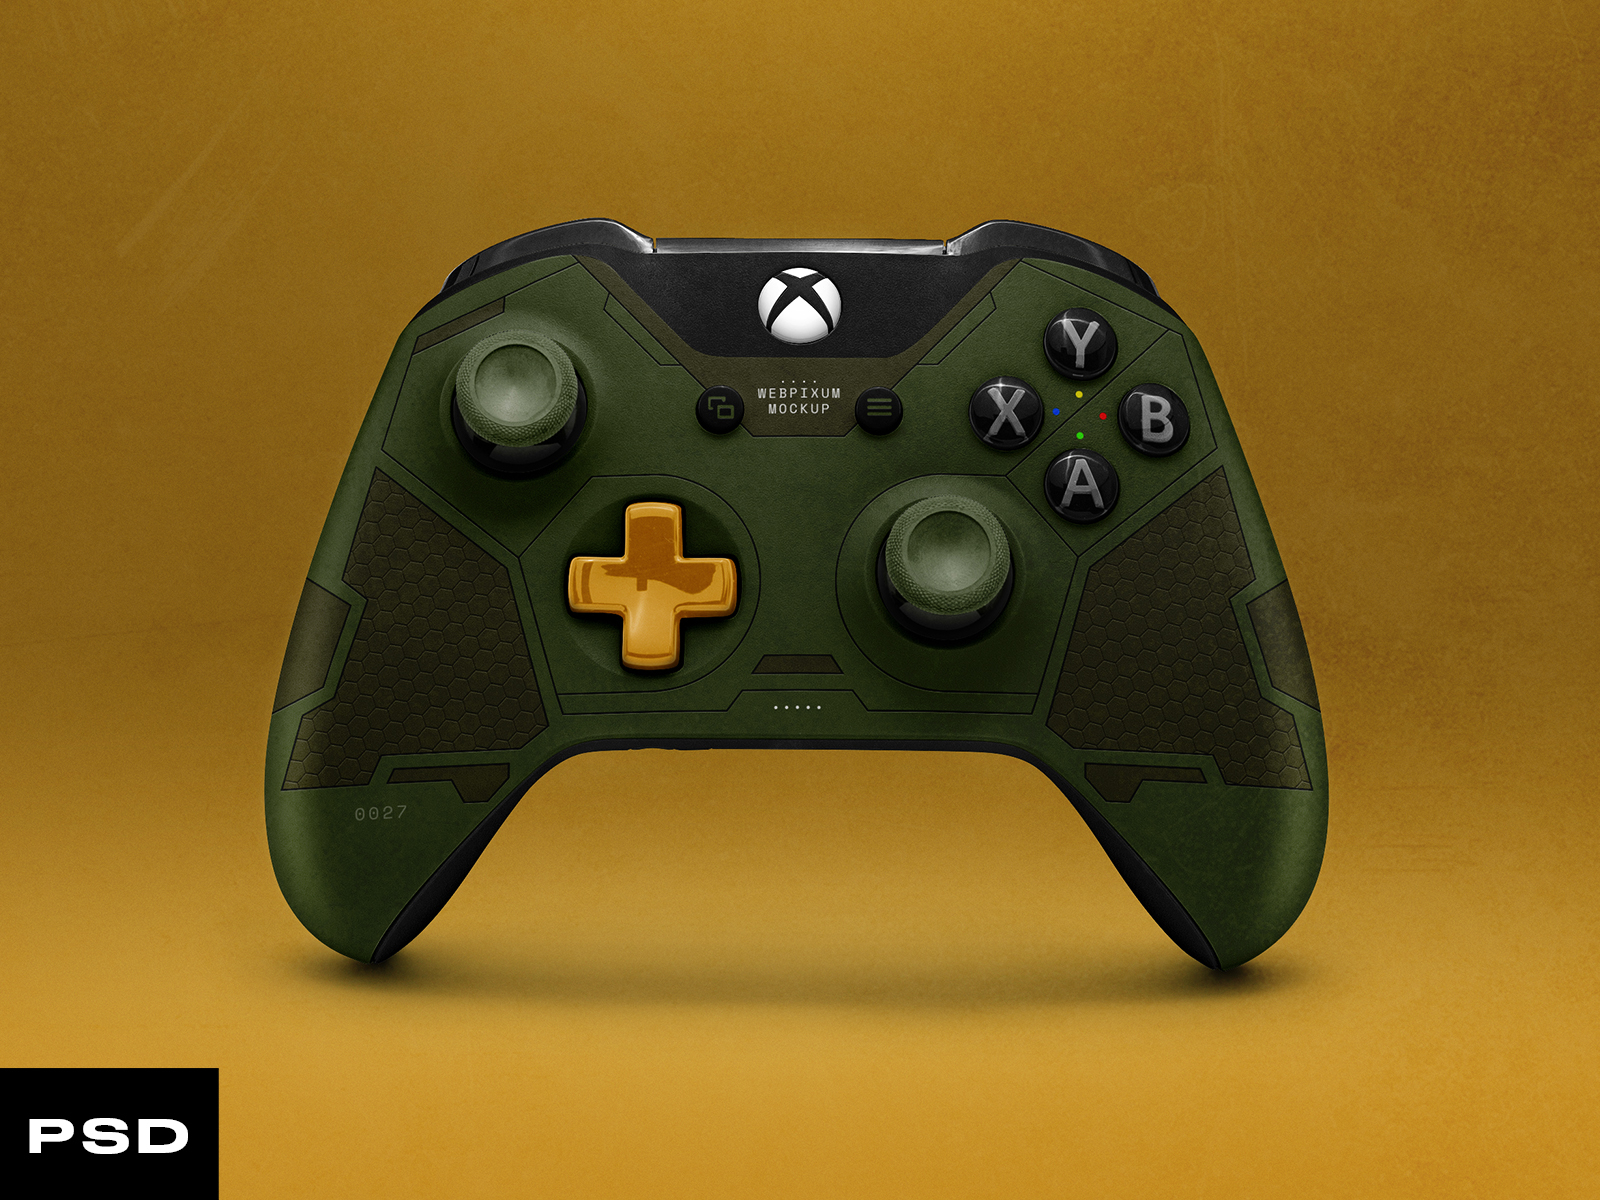 Download Free Xbox Controller Mockup by Brandon Williams on Dribbble